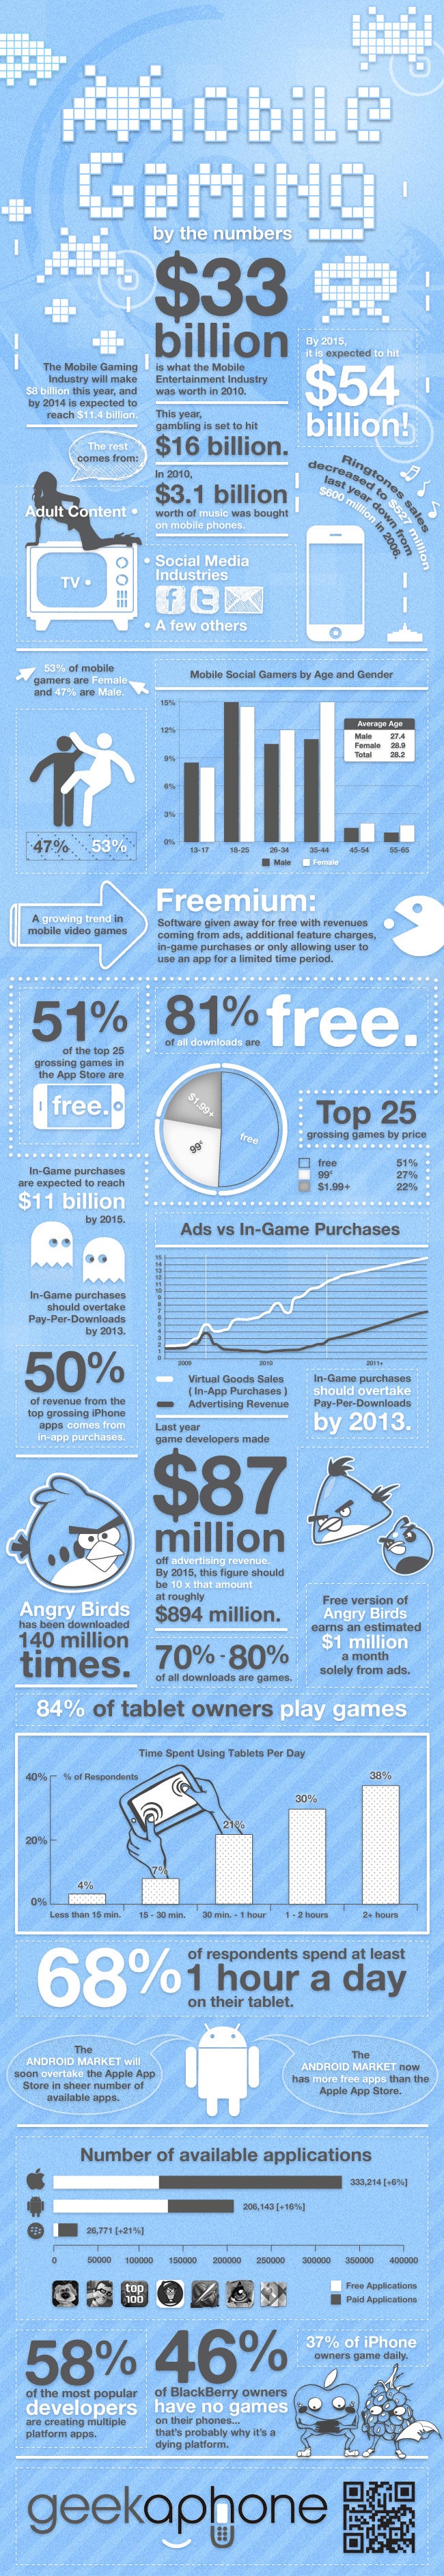 This is what the mobile video game industry looks like broken down into numbers